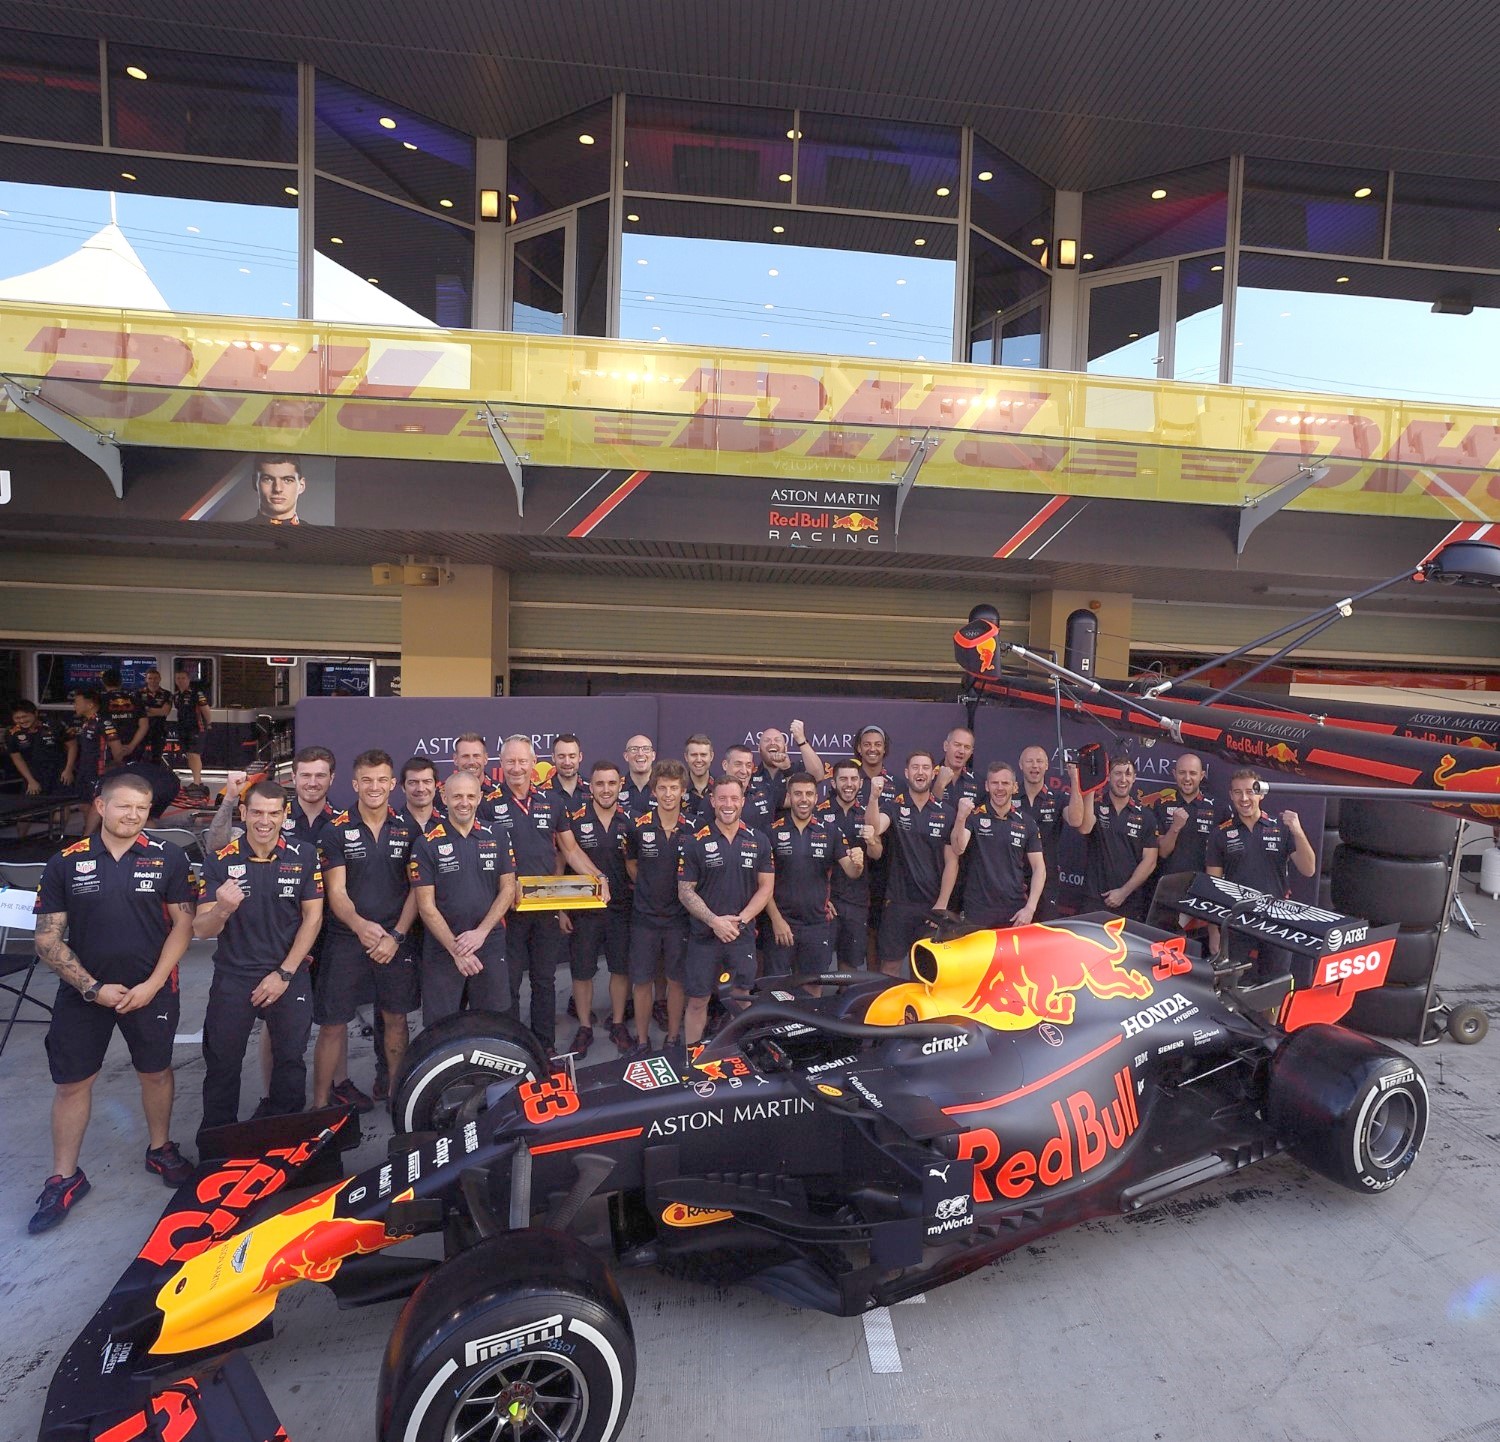 Red Bull team gets Fastest Pit Stop Award